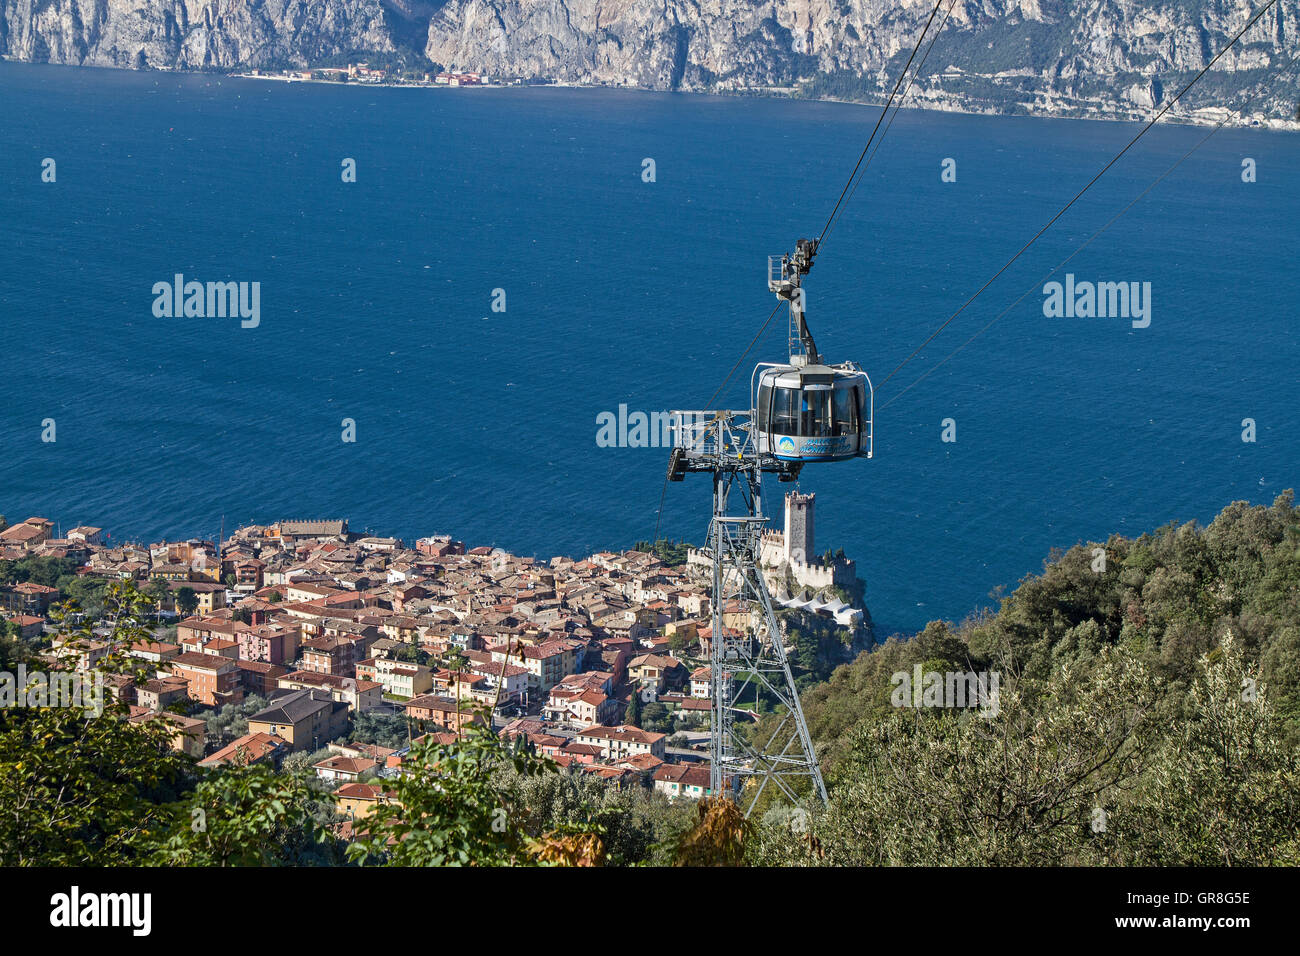 Malcesine Popular And Much-Visited Destination On The Eastern Shore Of Lake Garda Stock Photo